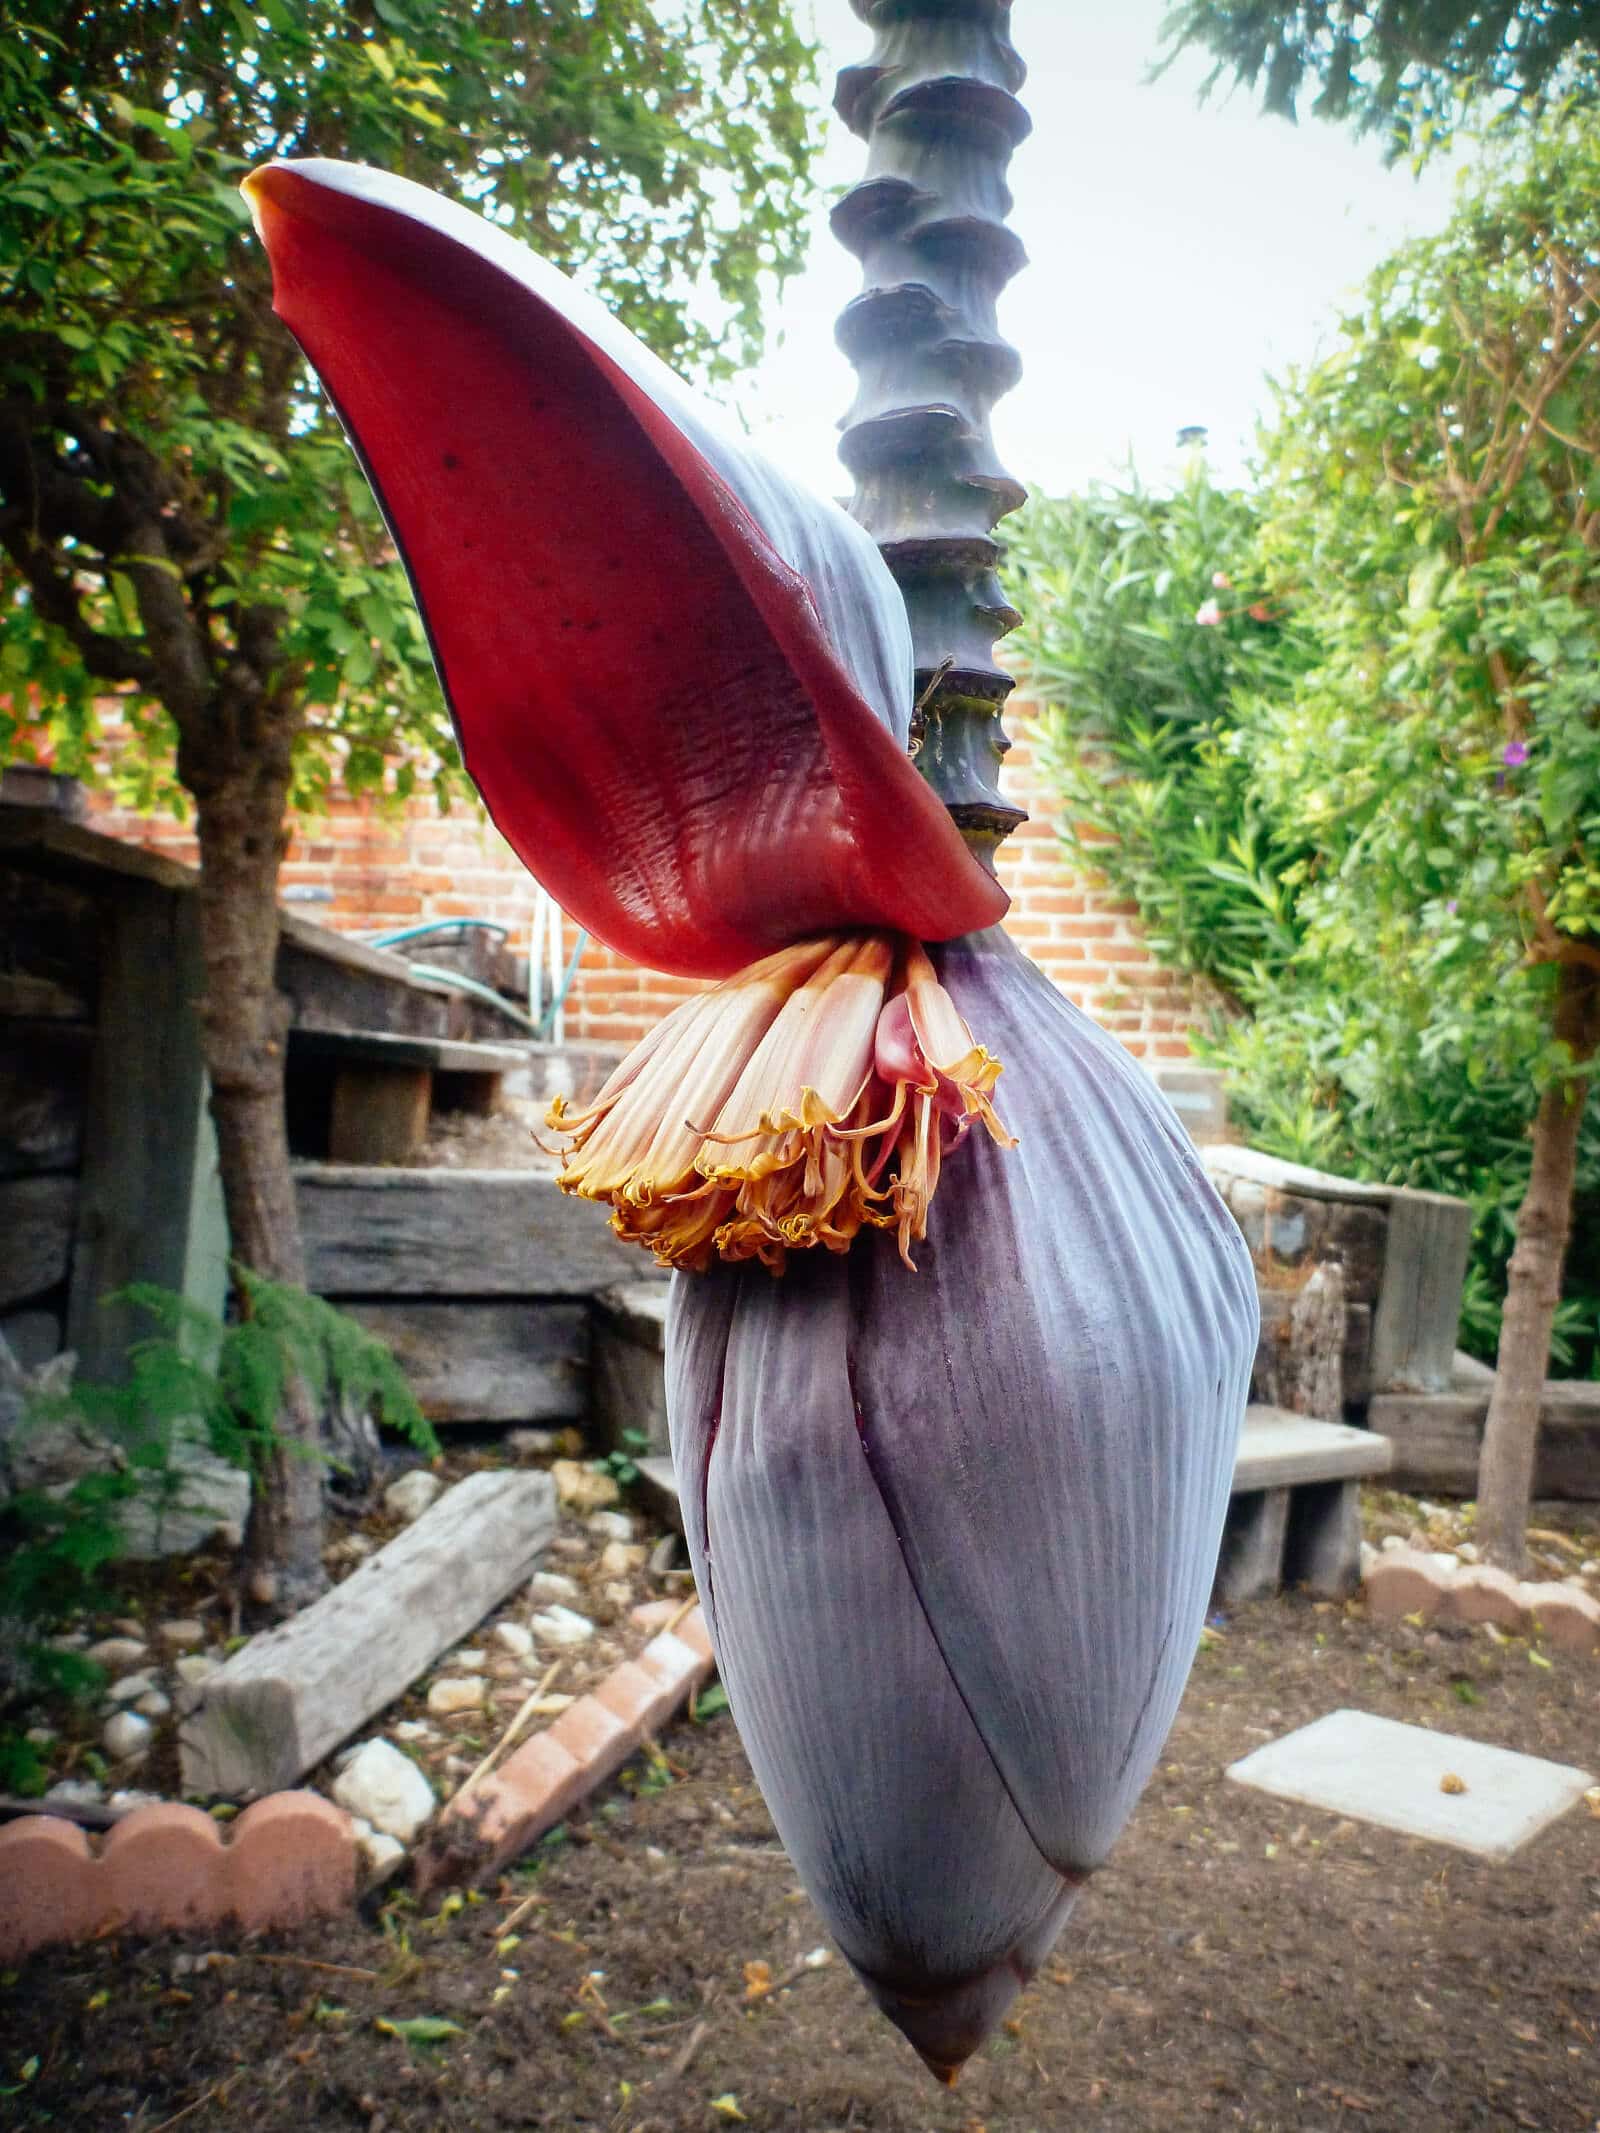 Each petal (bract) of the banana heart opens to reveal double rows of banana blossoms